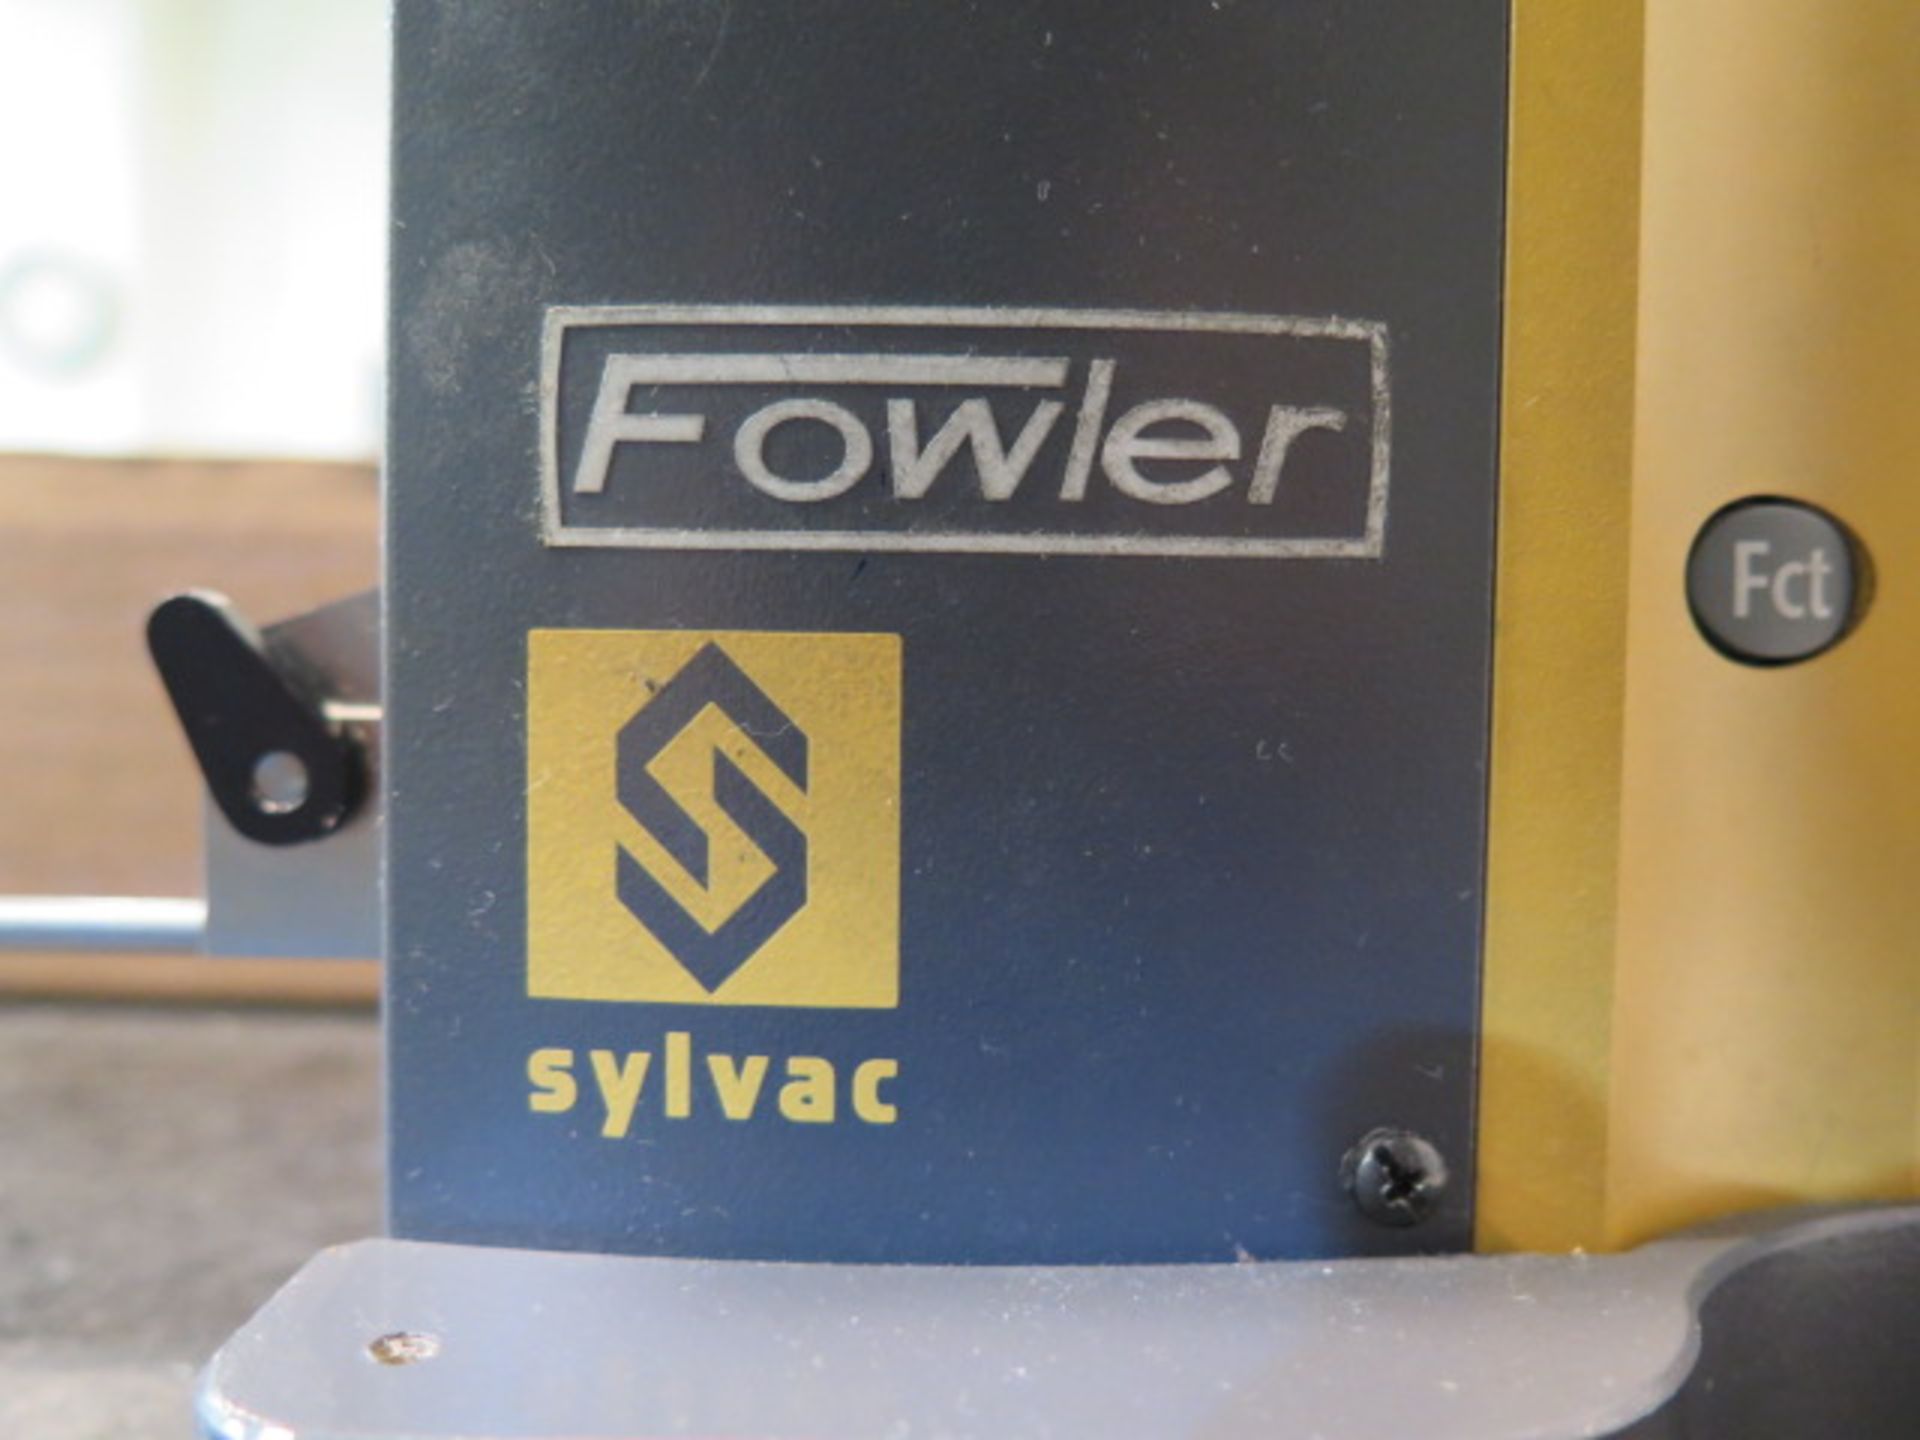 Fowler Sylvac Hi-Cal 300 Digital Height Gage (SOLD AS-IS - NO WARRANTY) - Image 7 of 7